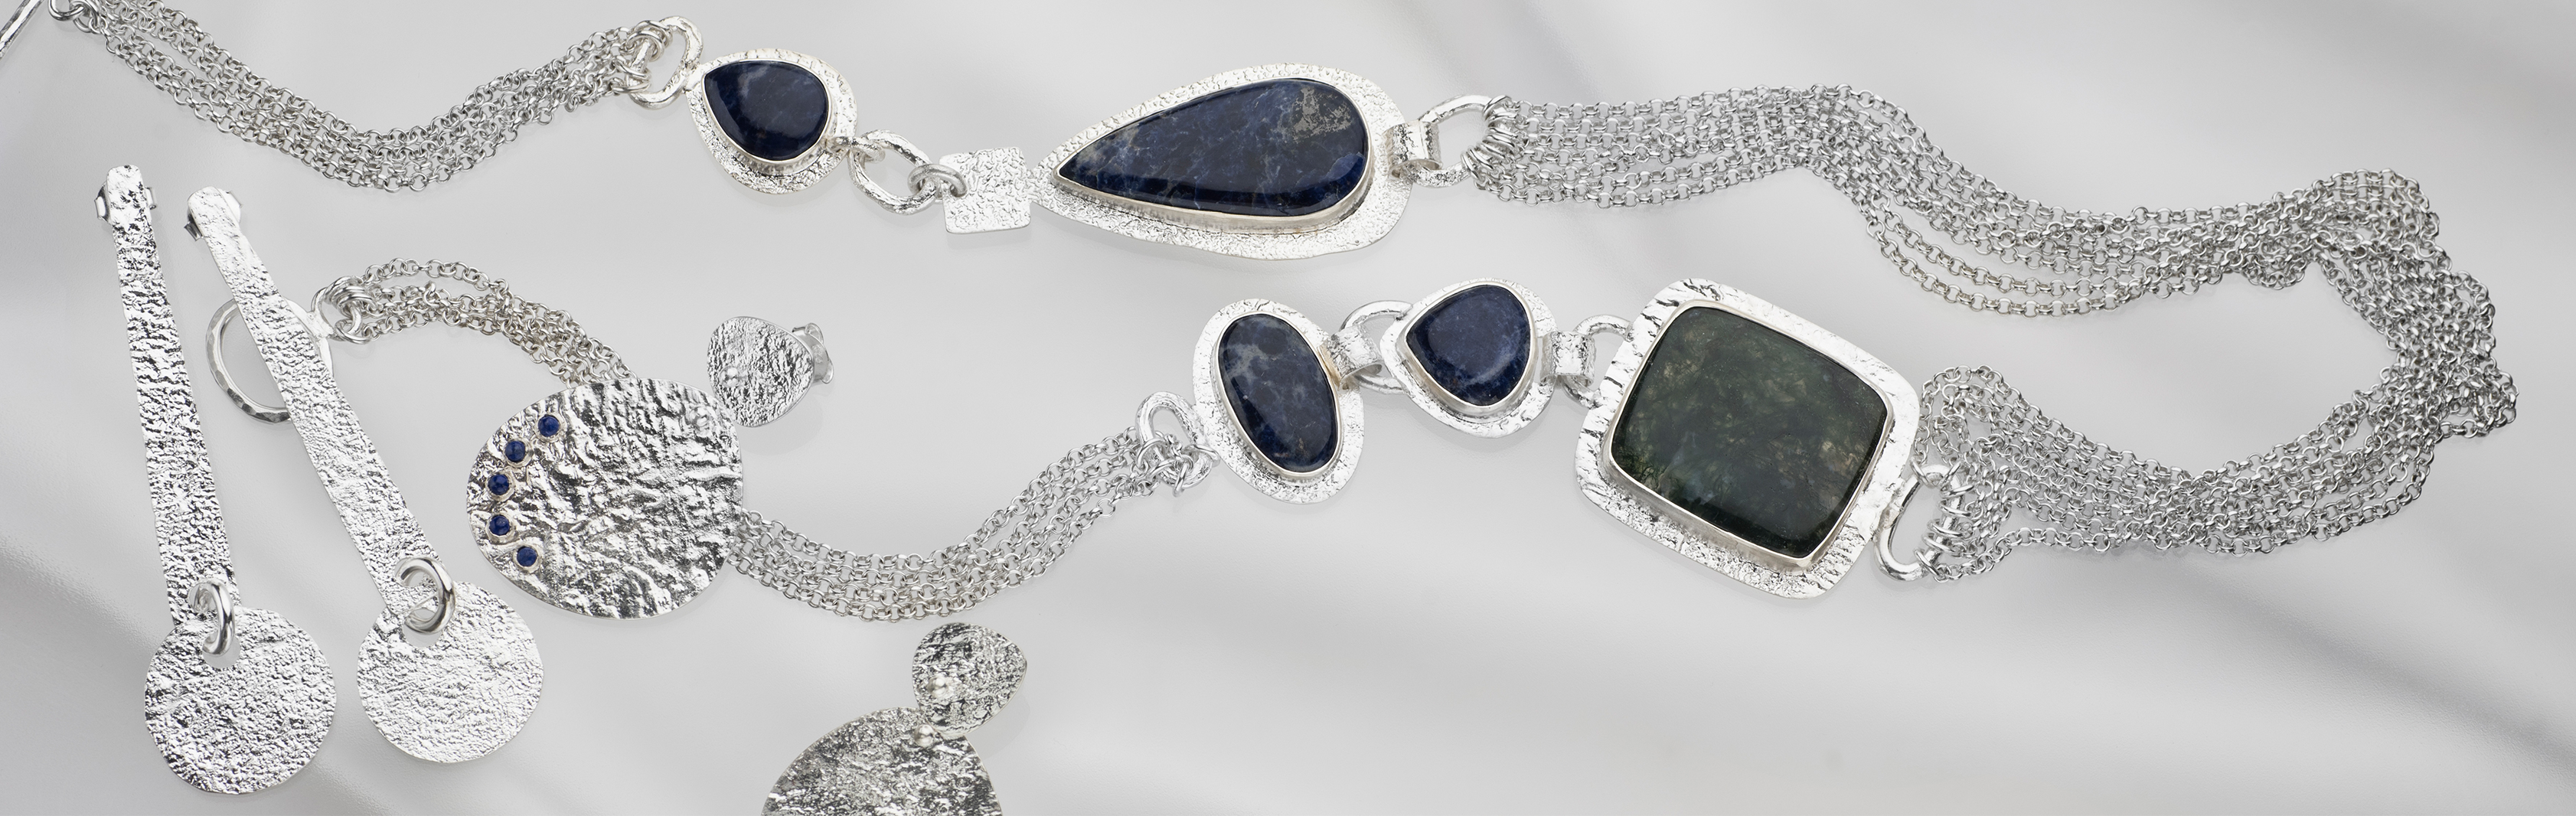 Eye of the Storm Collection | 925 Sterling Silver Jewelry with Moss Agate Sodalite